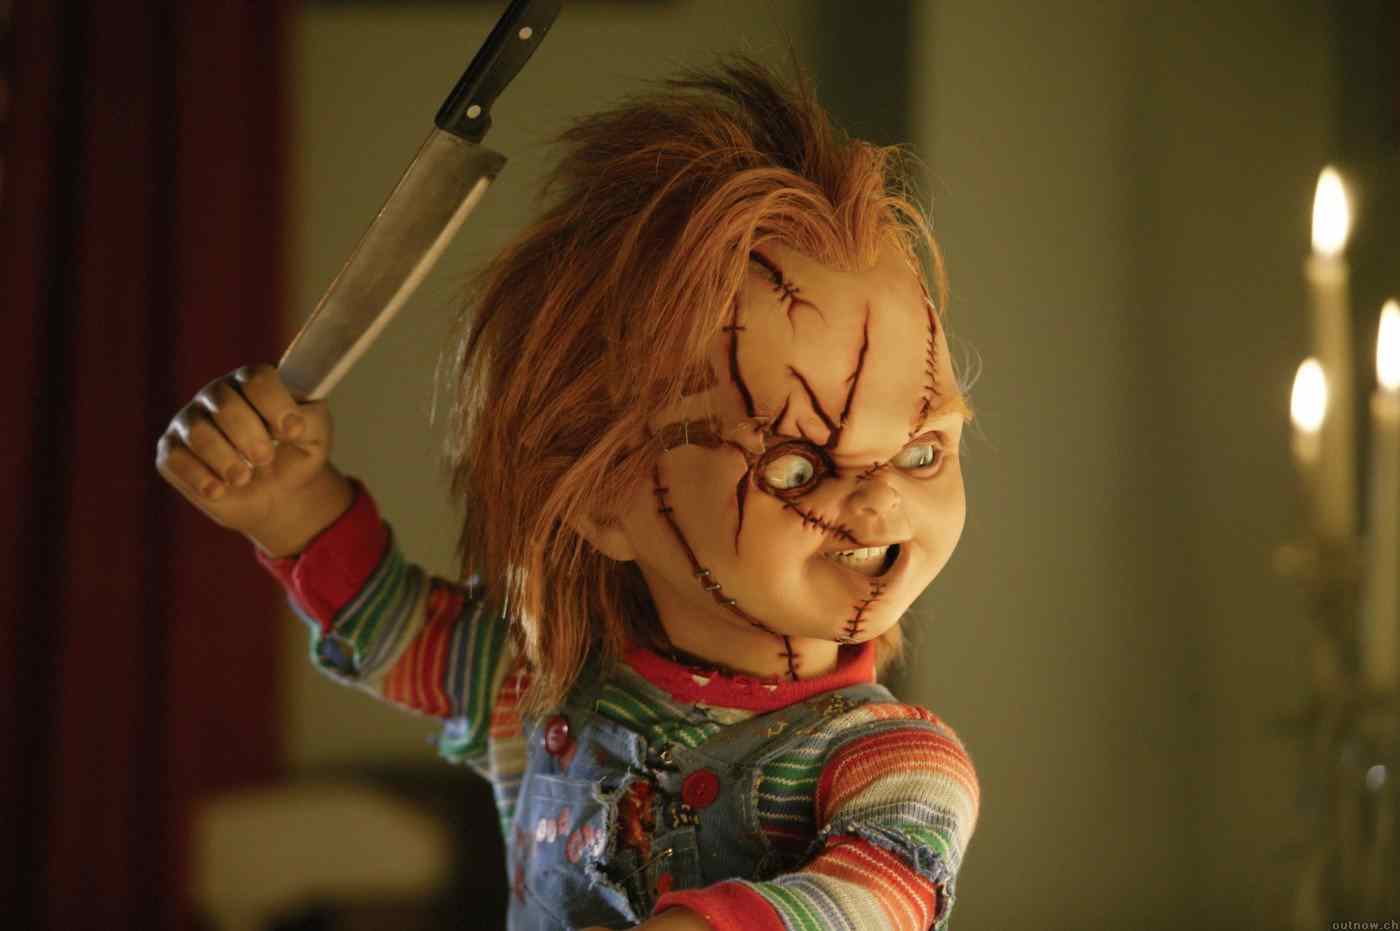 the hit movie chucky about the killer doll based on real life doll robert.